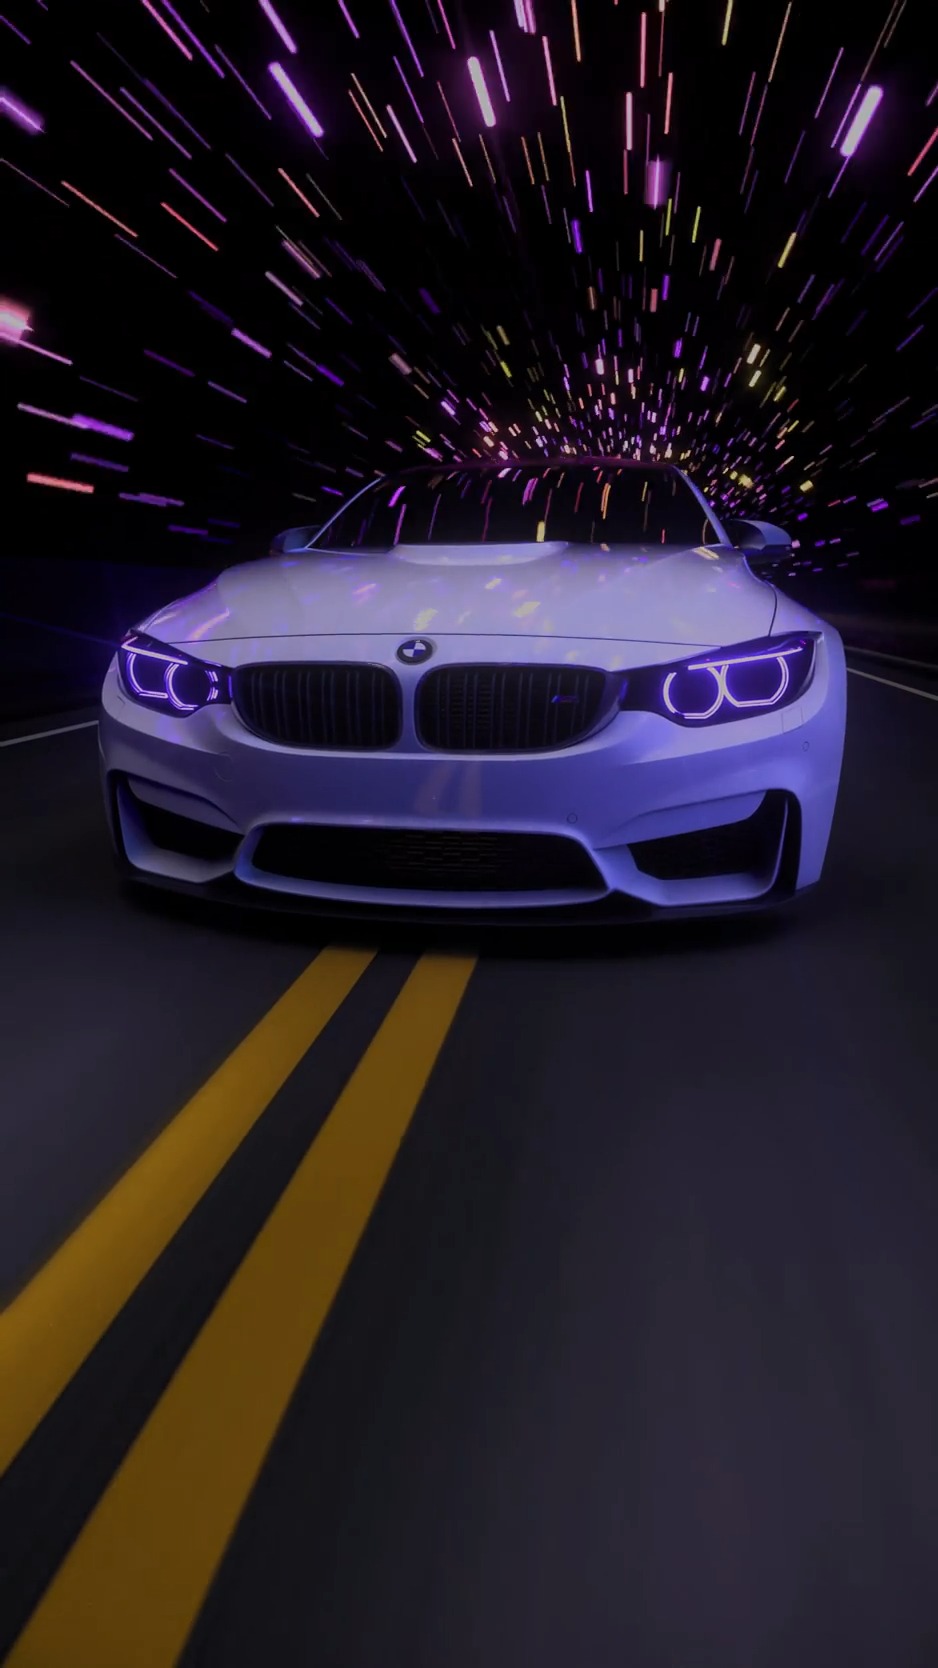 thumb for Bmw Blue Live Wallpaper